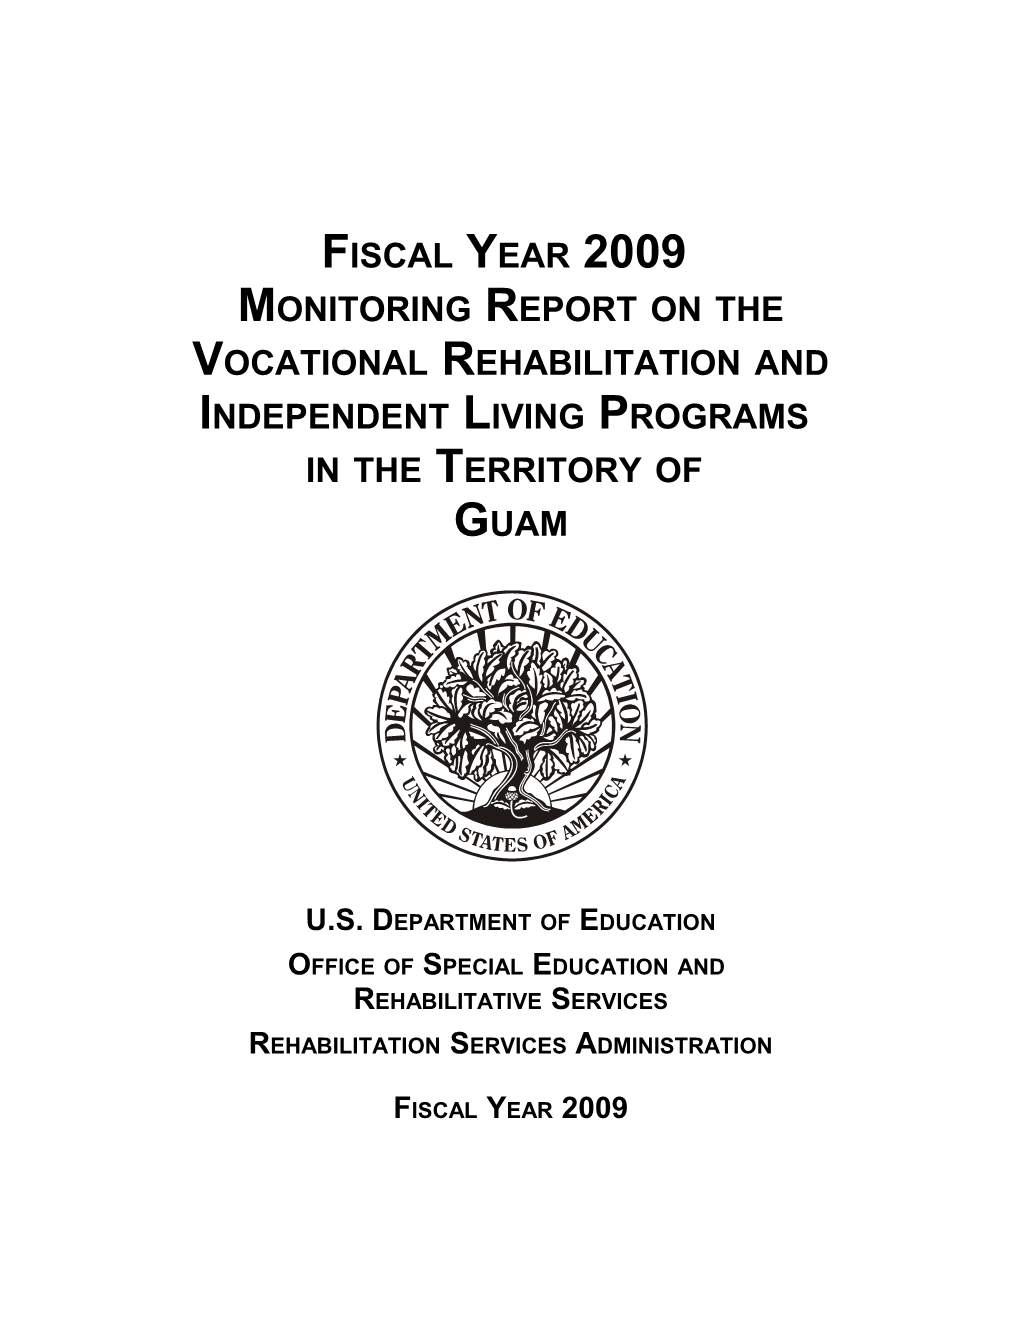 Fiscal Year 2008 Monitoring Report on the Vocational Rehabilitation and Independent Living s1